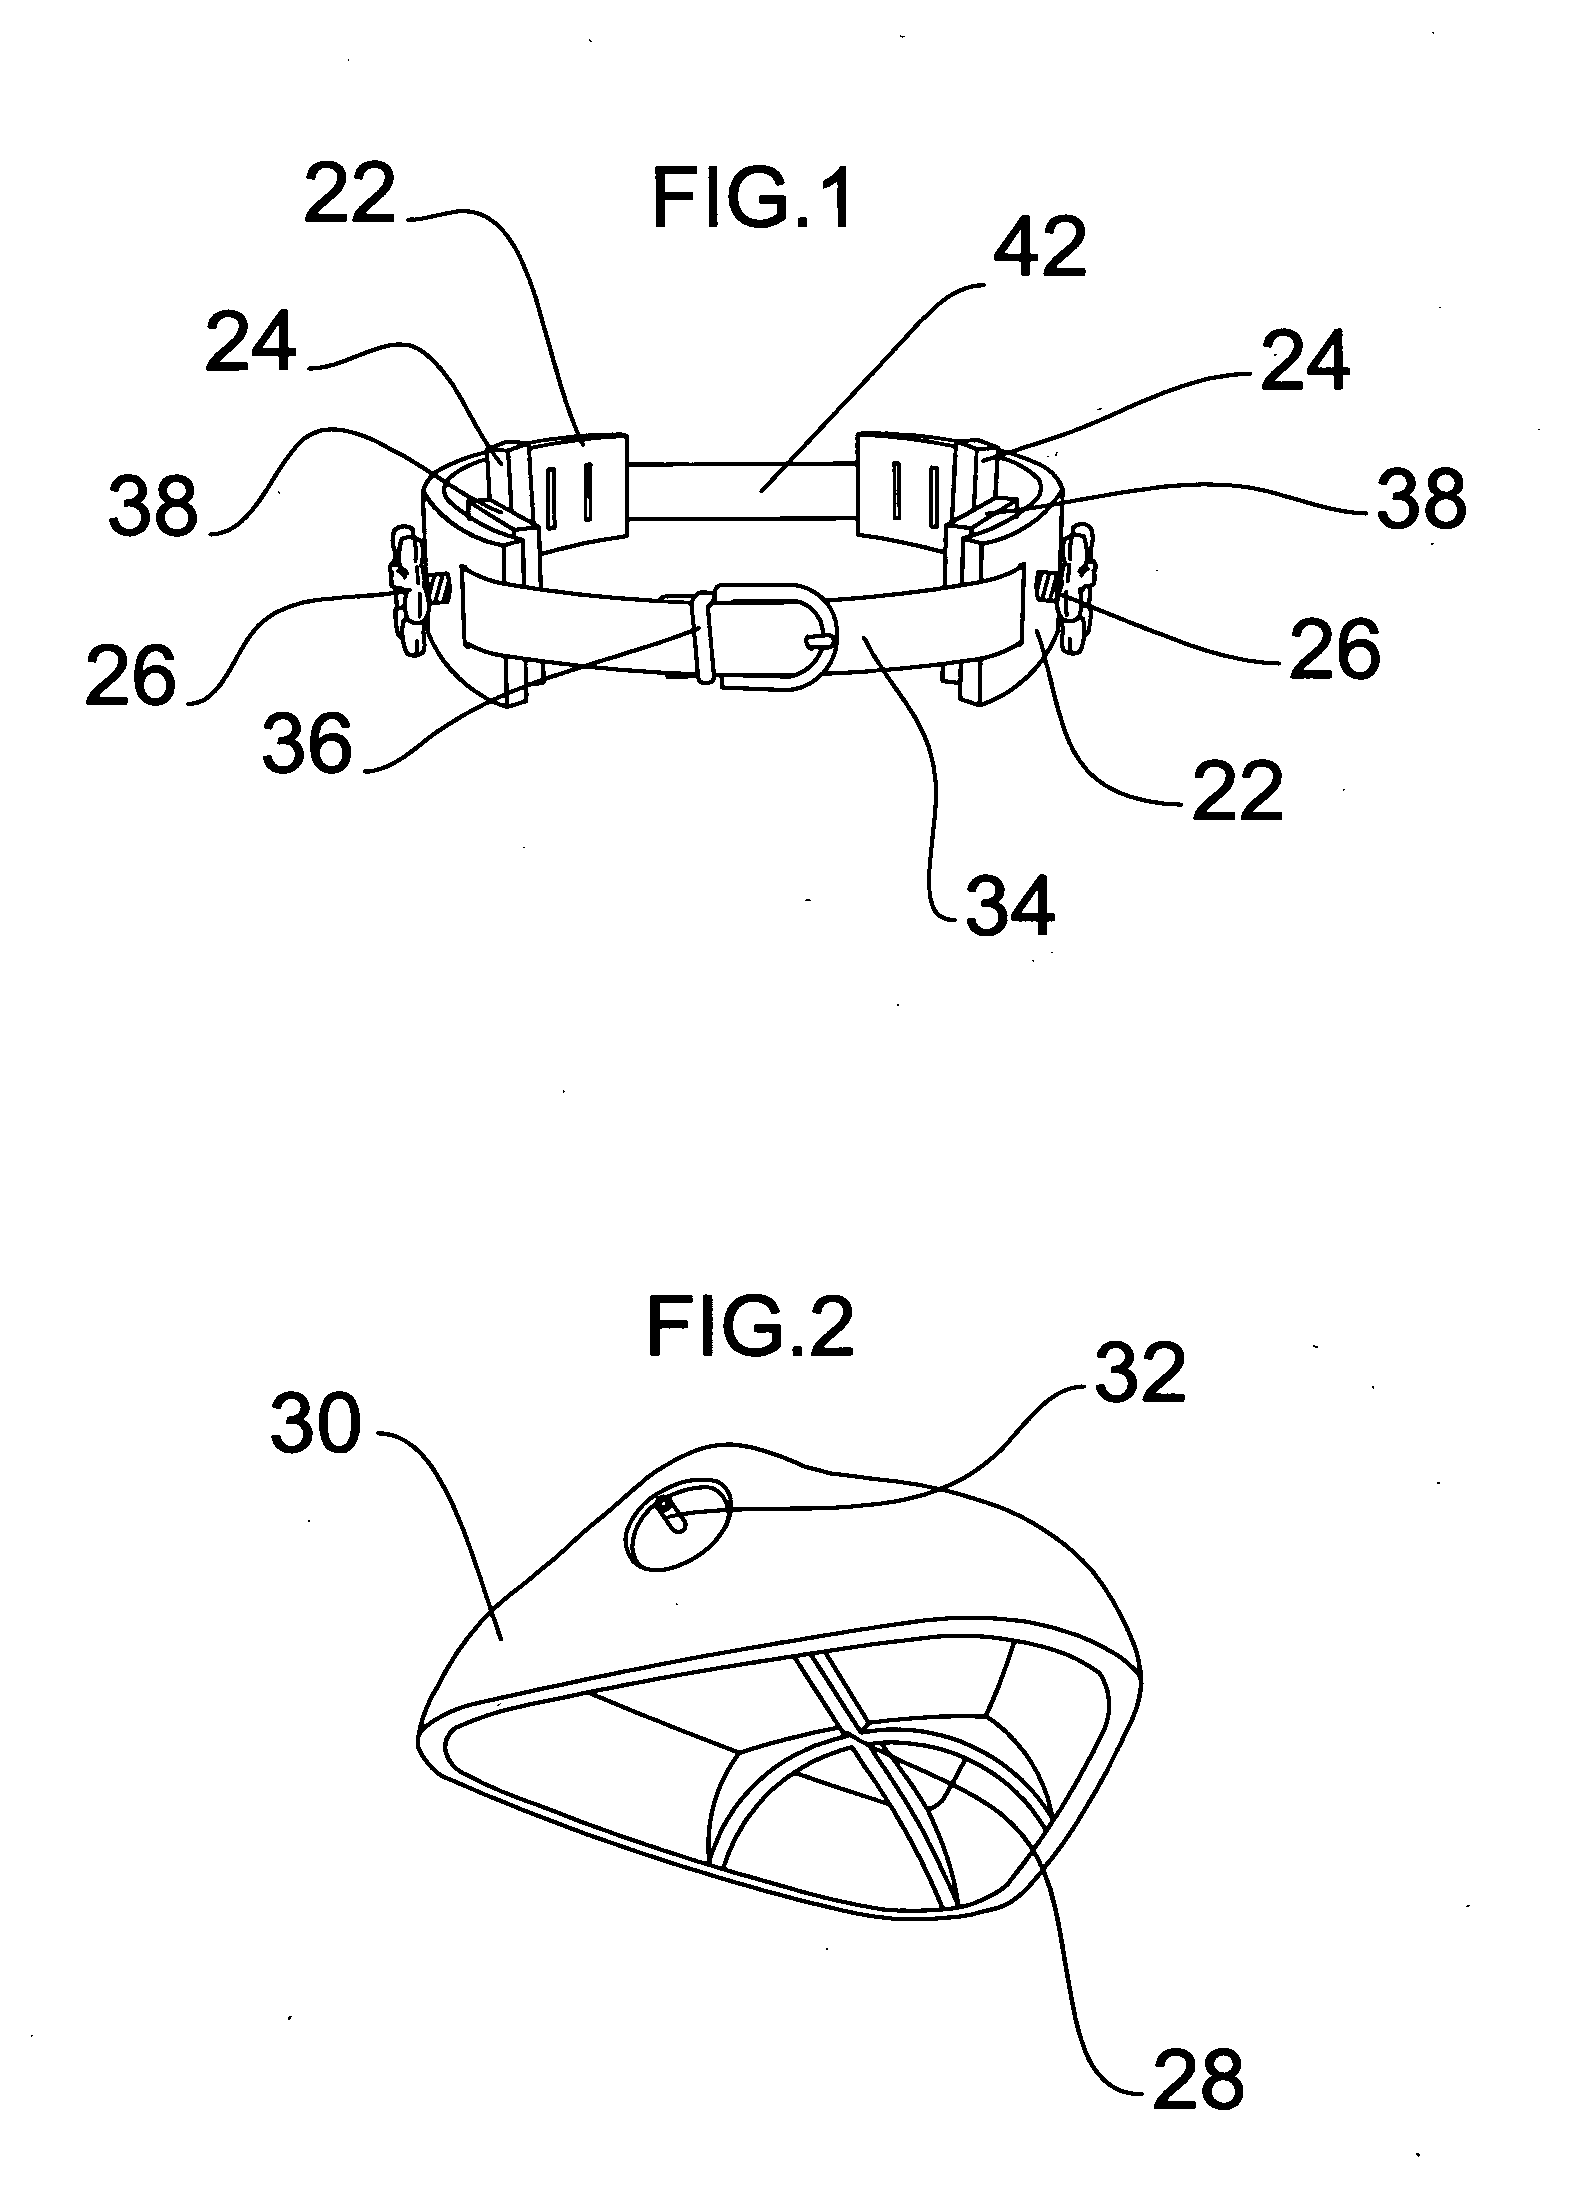 Method and apparatus for nonsurgical correction of chest wall deformities